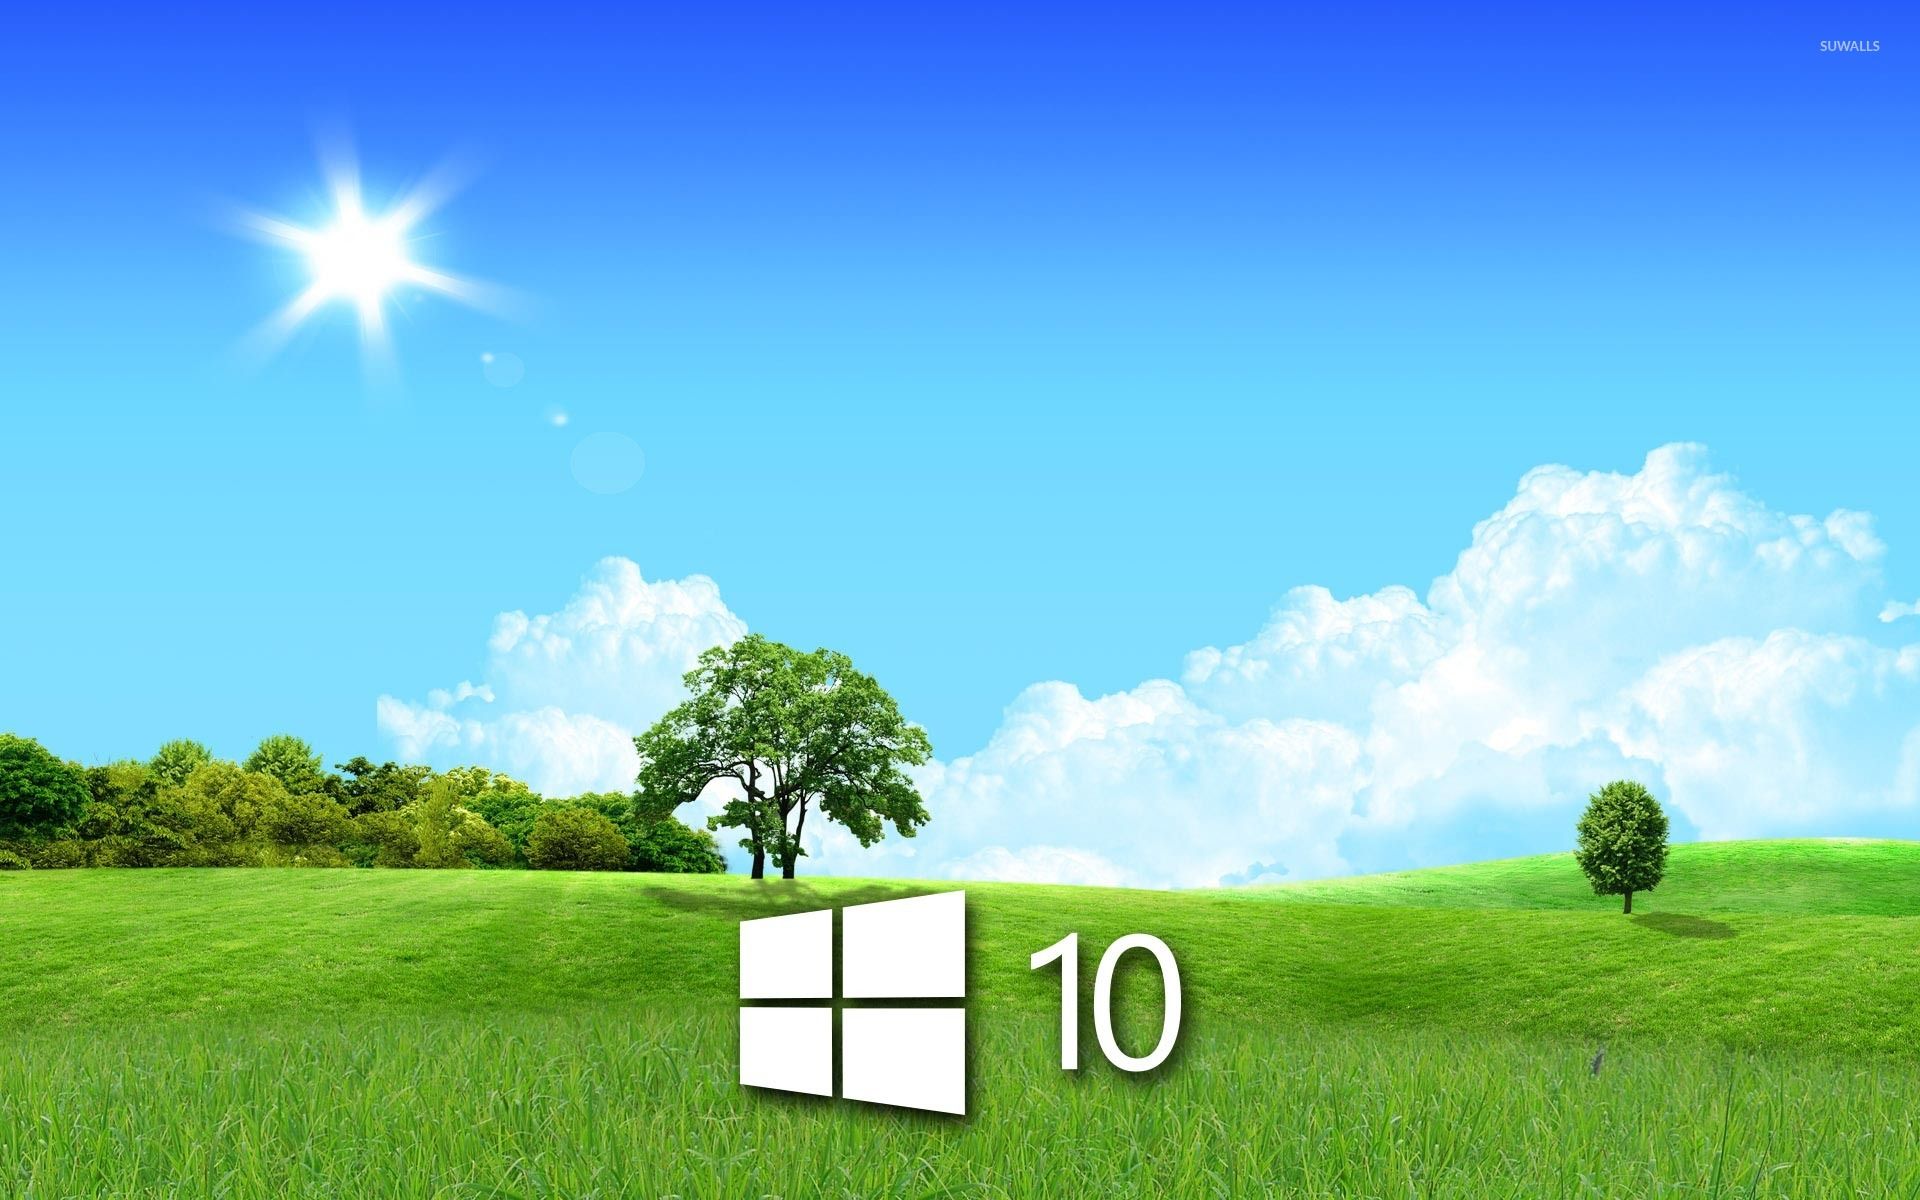 Windows 10 in the spring simple logo wallpaper